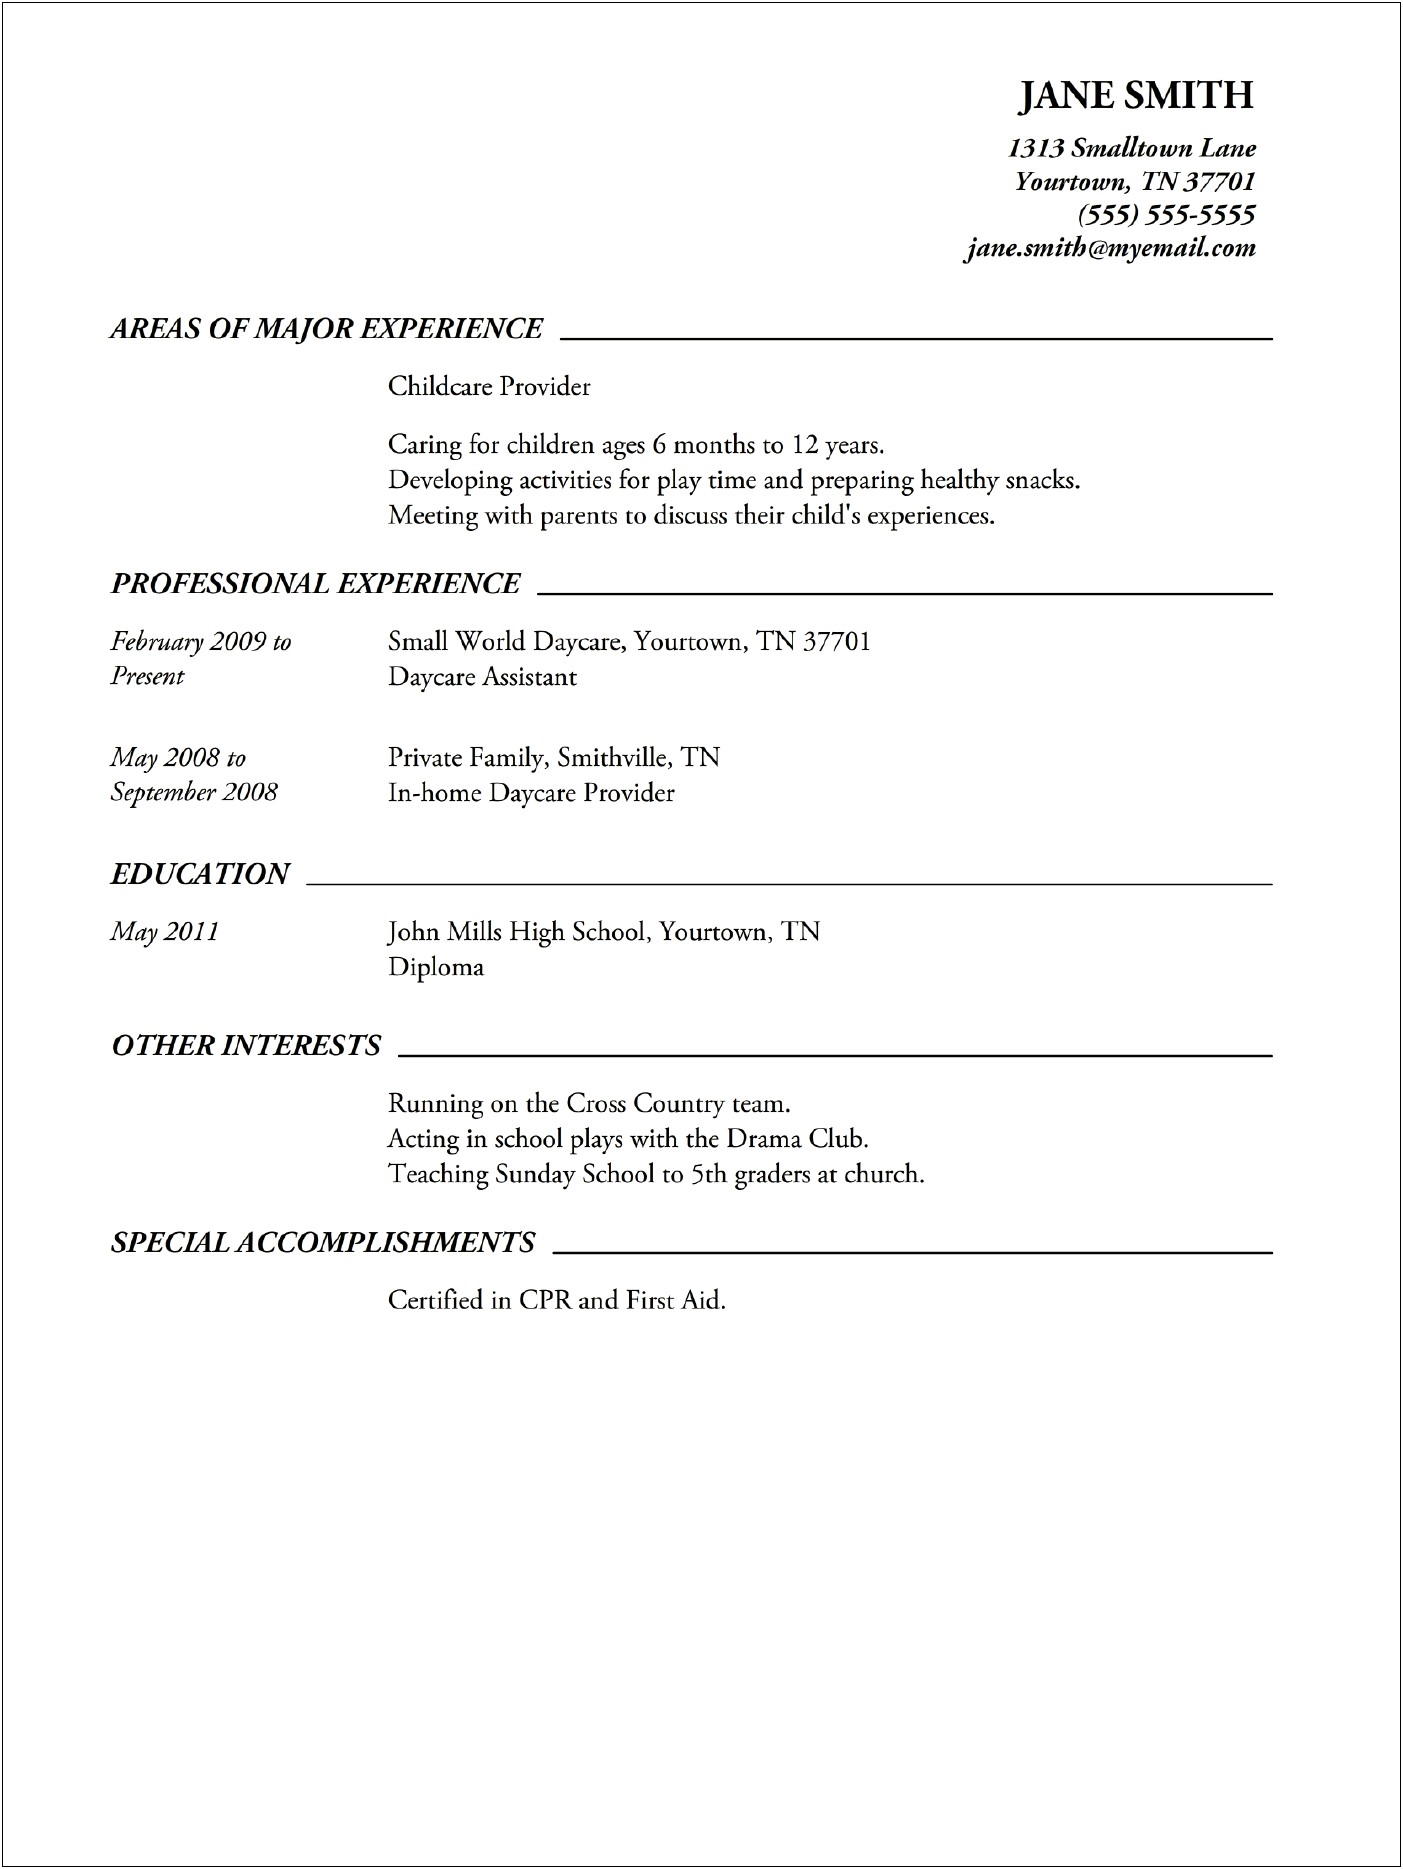 Objectives For High School Graduate Resume